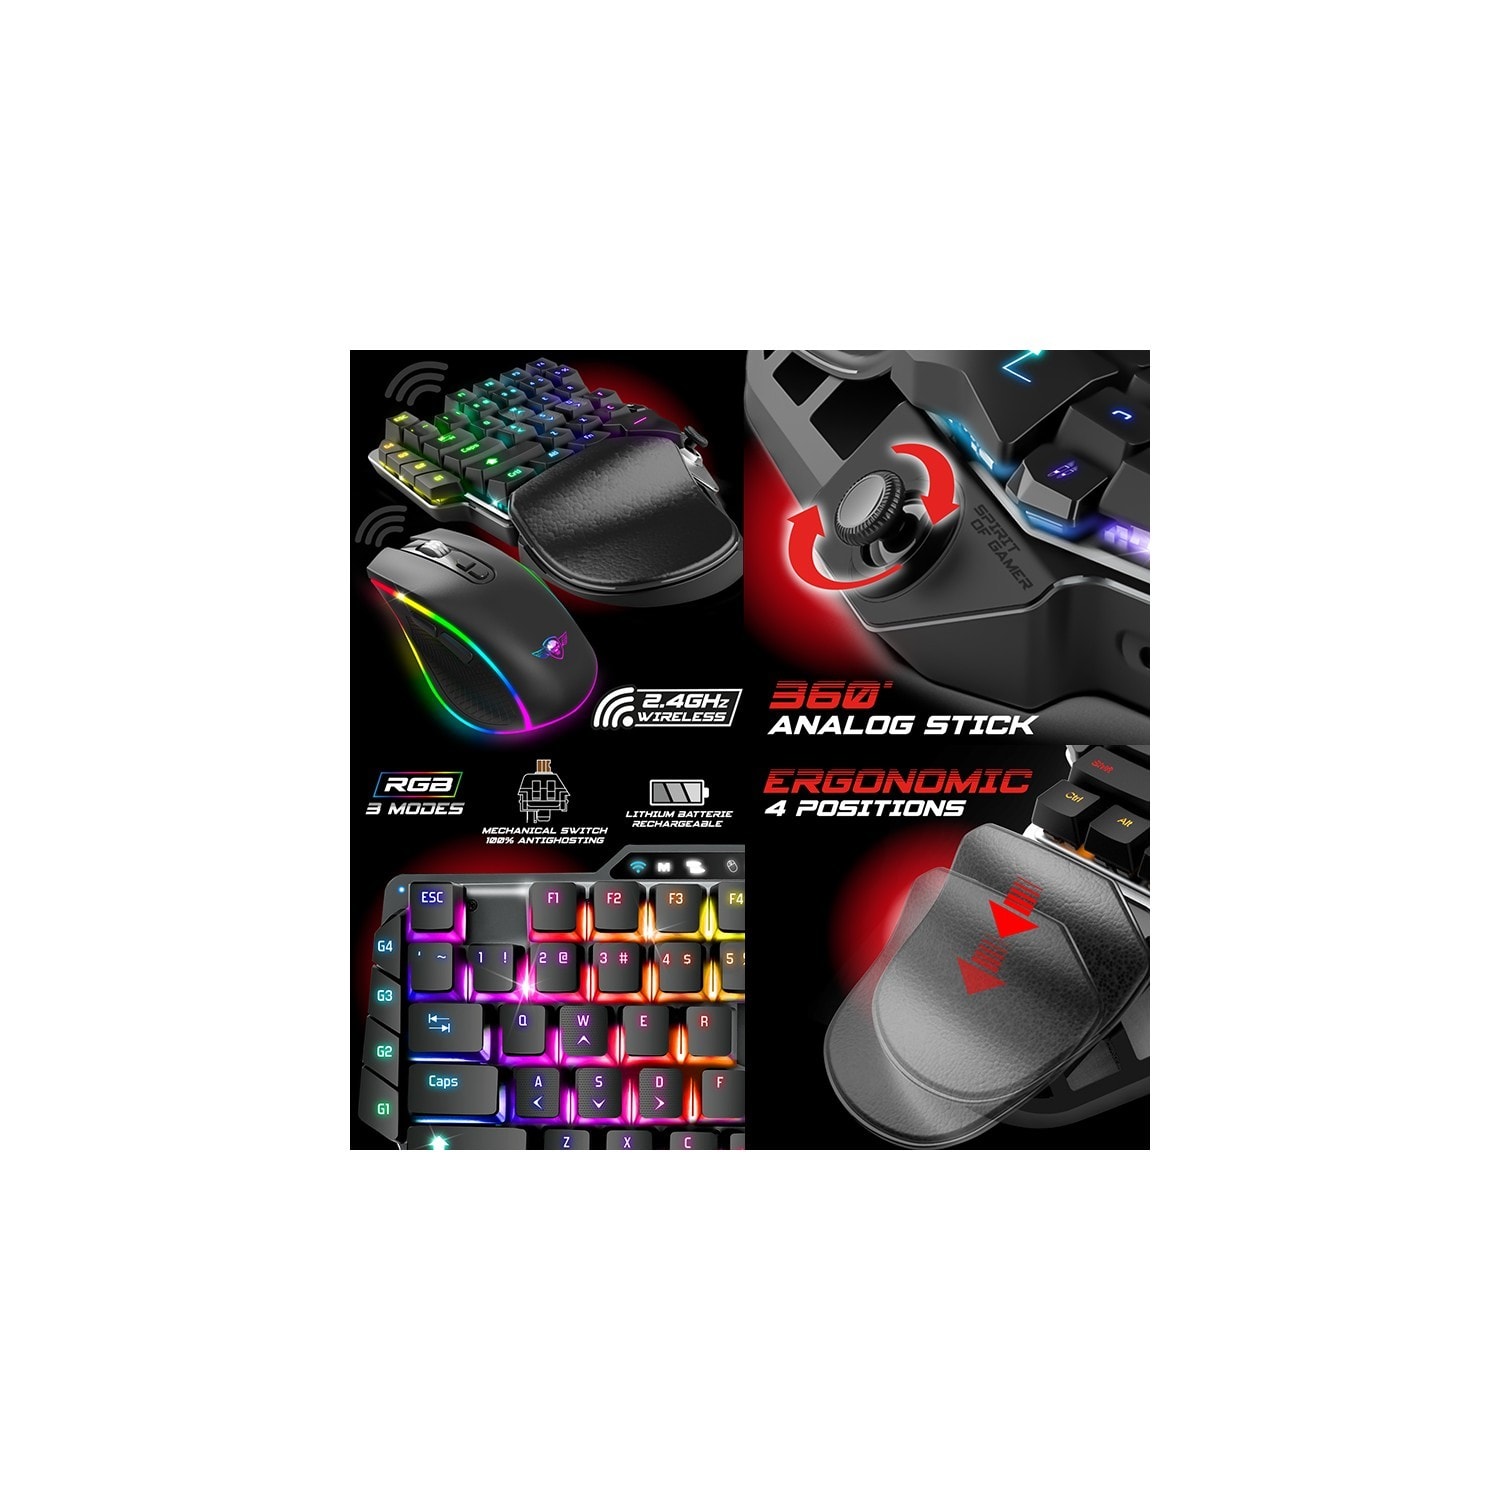 Pack clavier souris sans fil xpert wireless gameboard g1100 pour xbox, ps4/ ps5, switch, pc SPIRIT